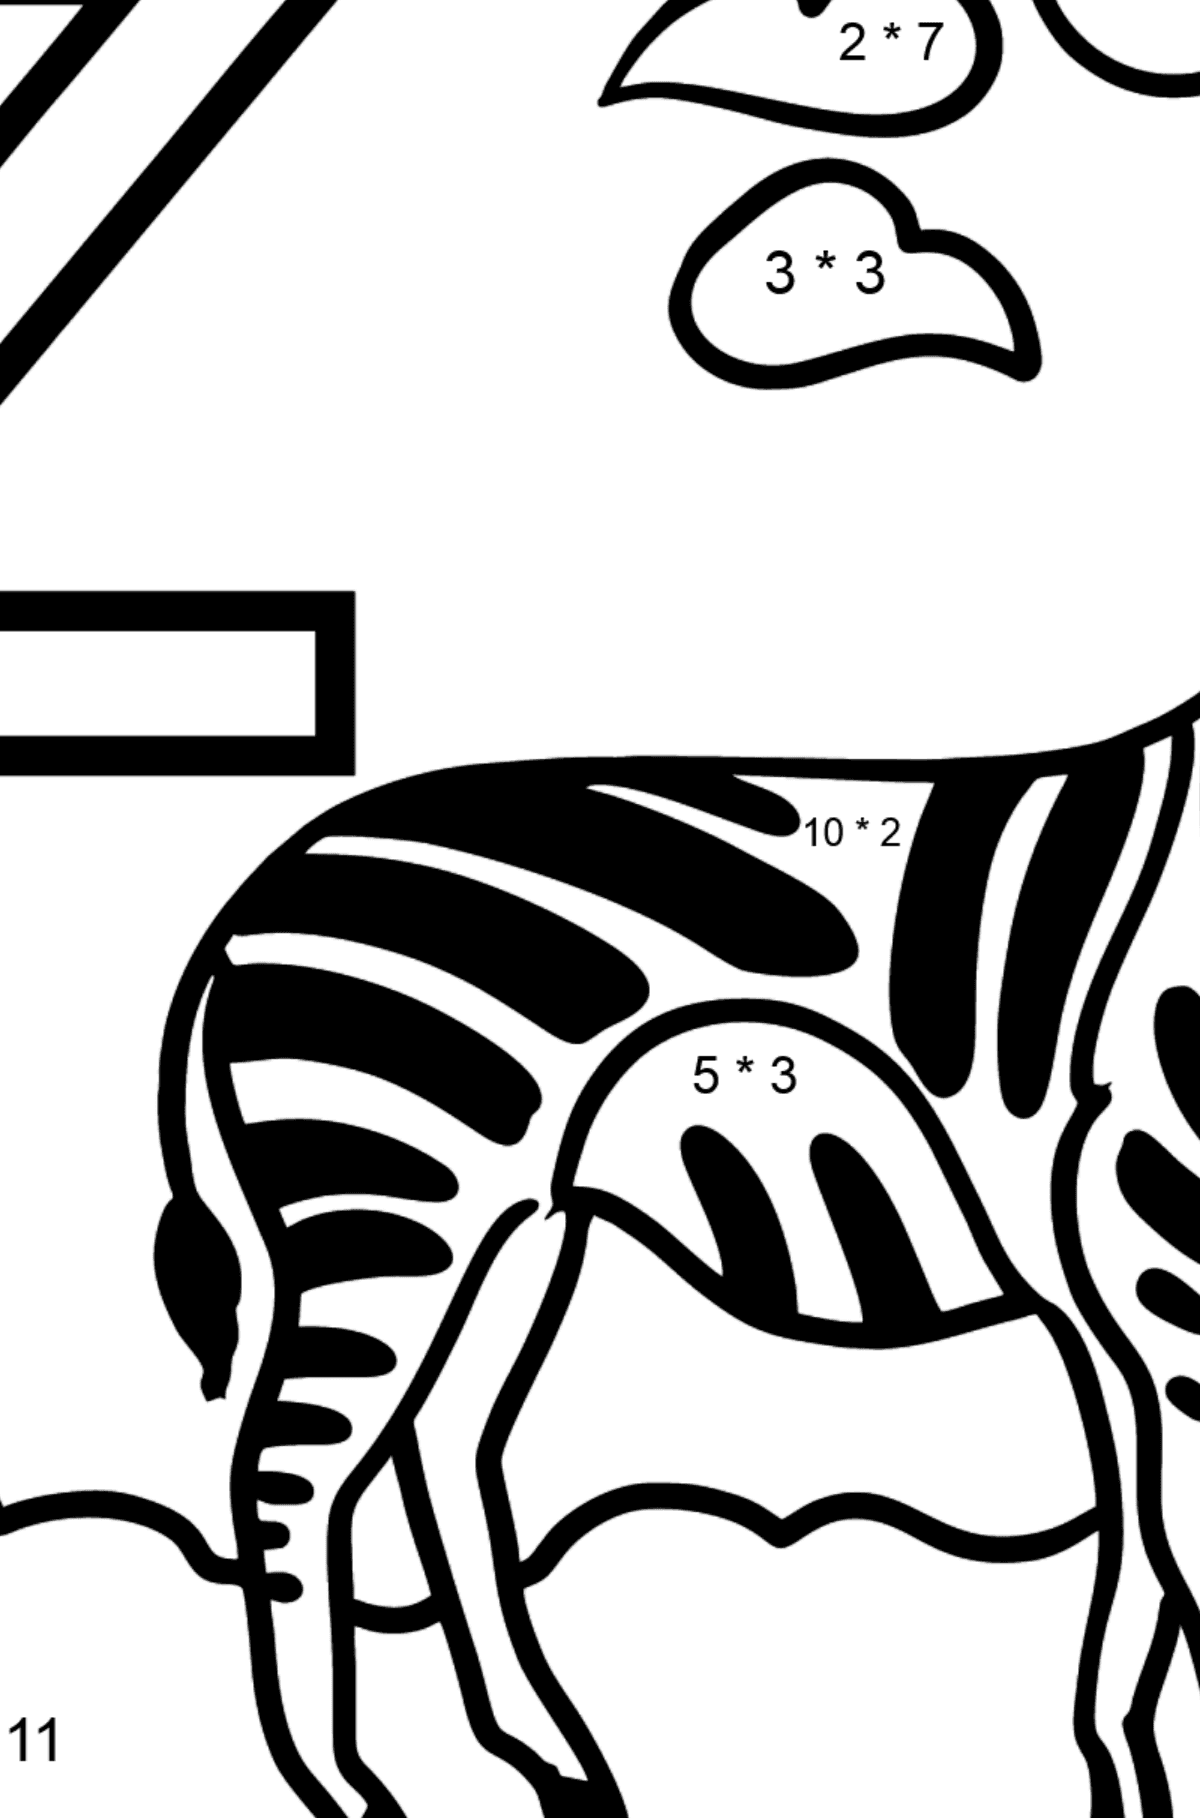 English Letter Z coloring pages - ZEBRA - Math Coloring - Multiplication for Kids